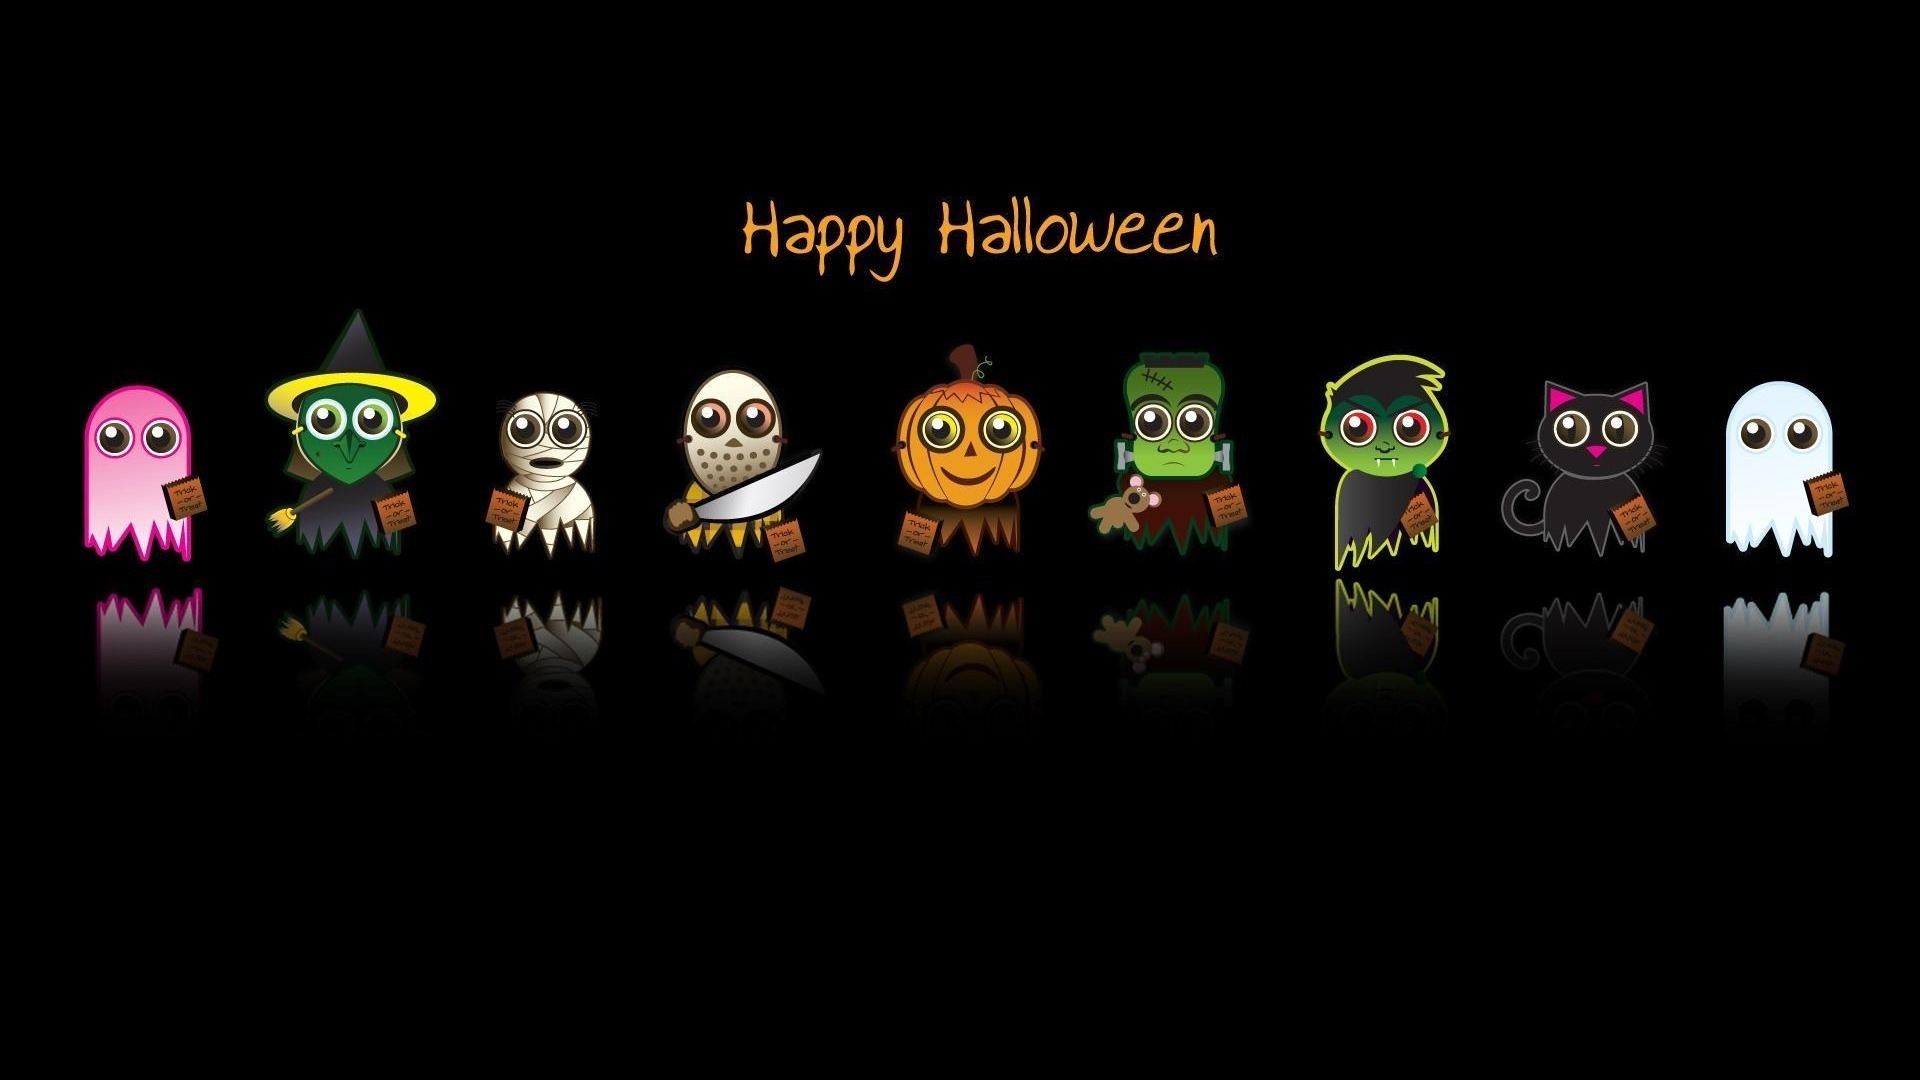 Happy Halloween Characters for 1920 x 1080 HDTV 1080p resolution